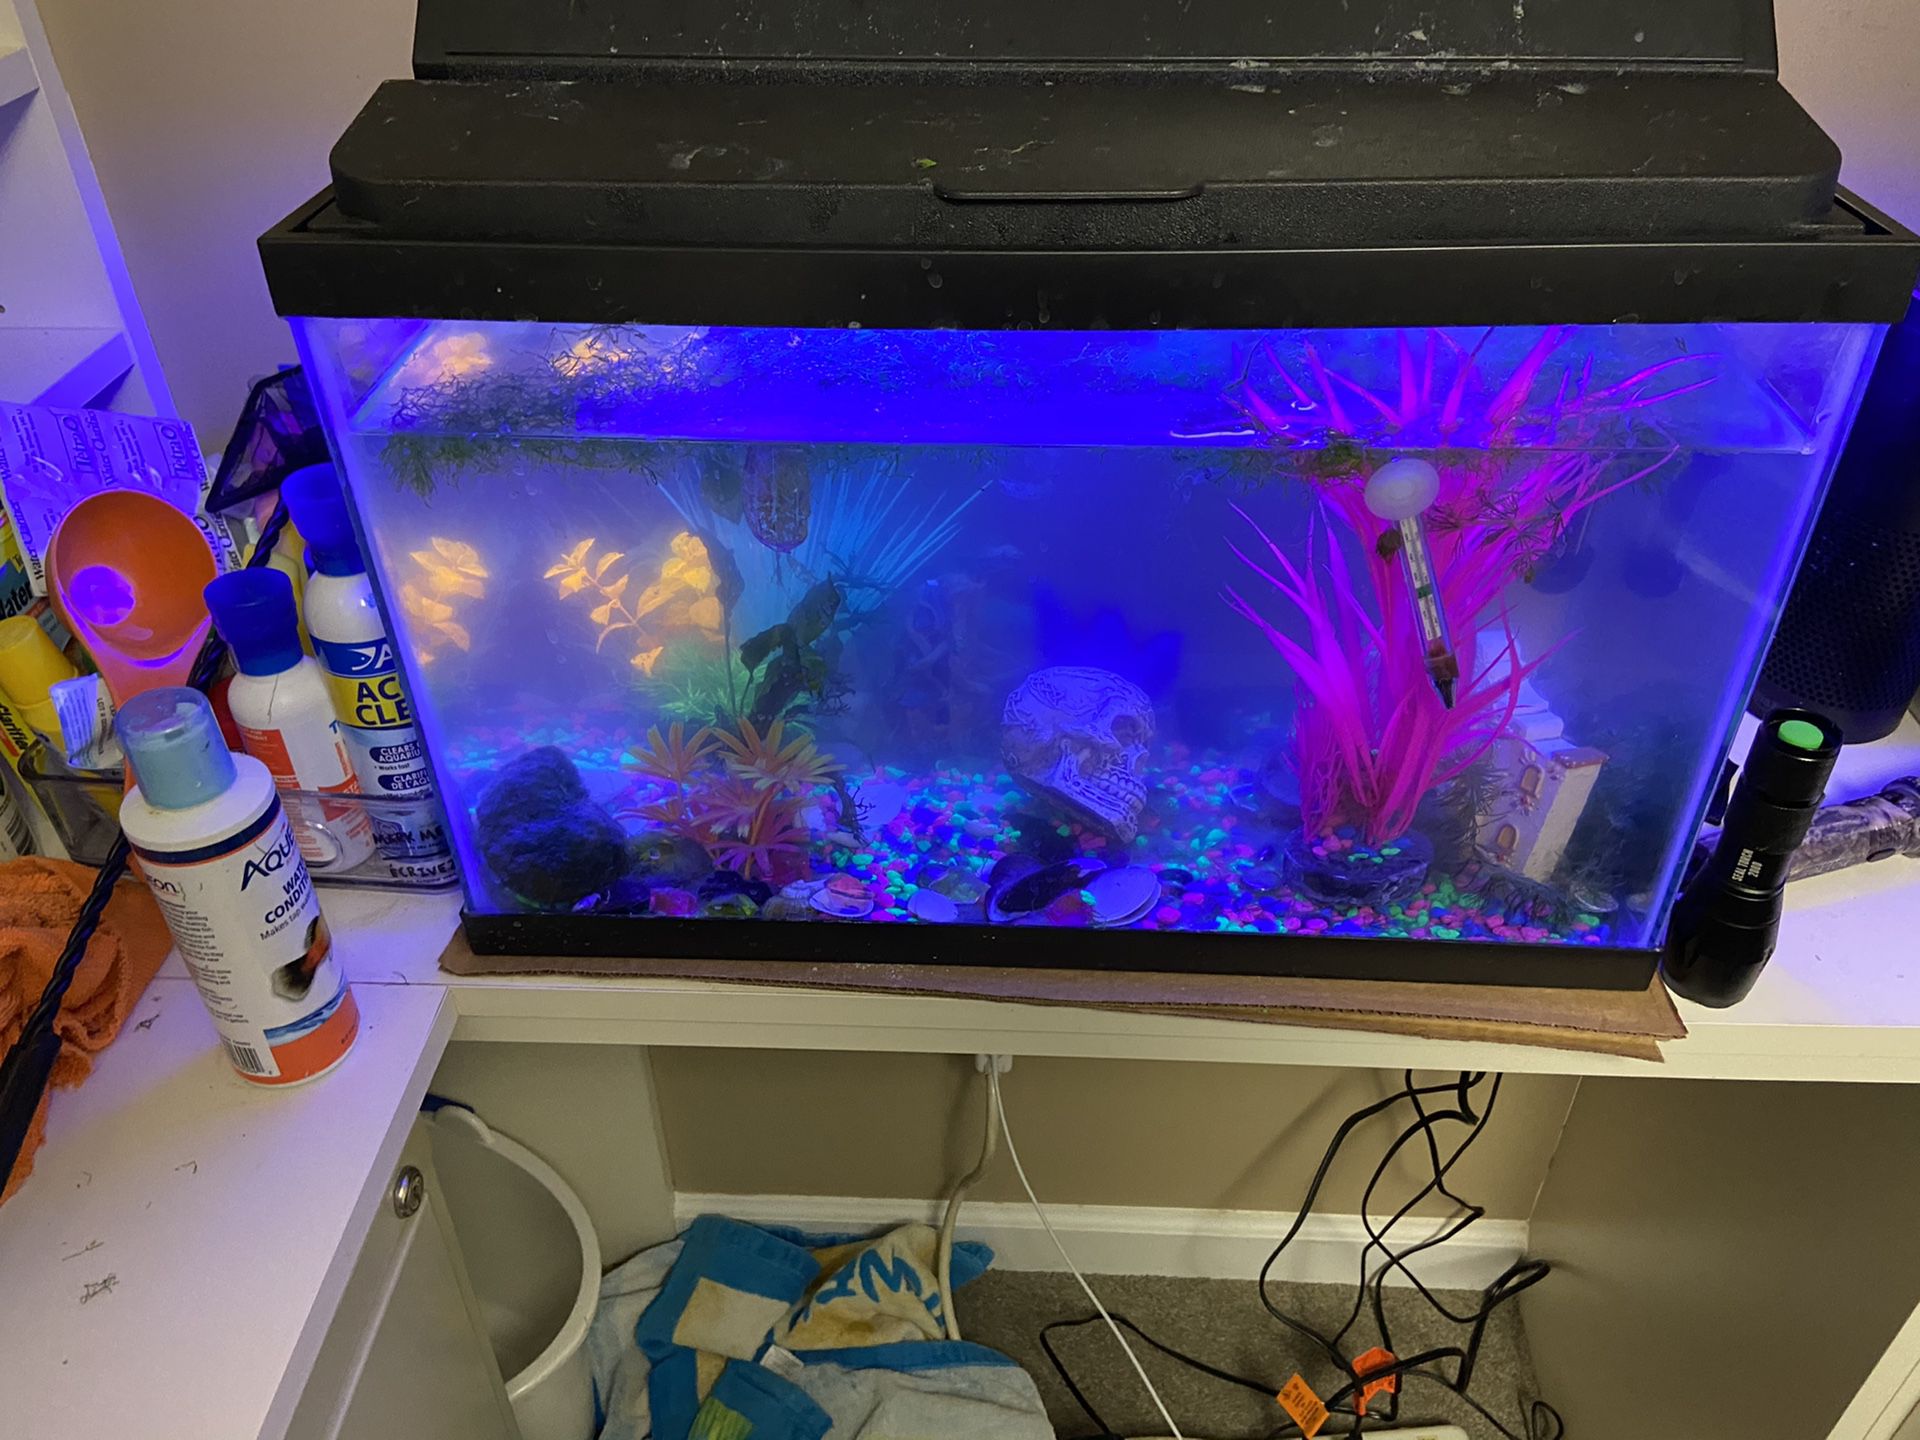 10 gal aquarium with fish. Filter accessories food chemicals and electric pump. All for only $25. Contact george. {contact info removed}